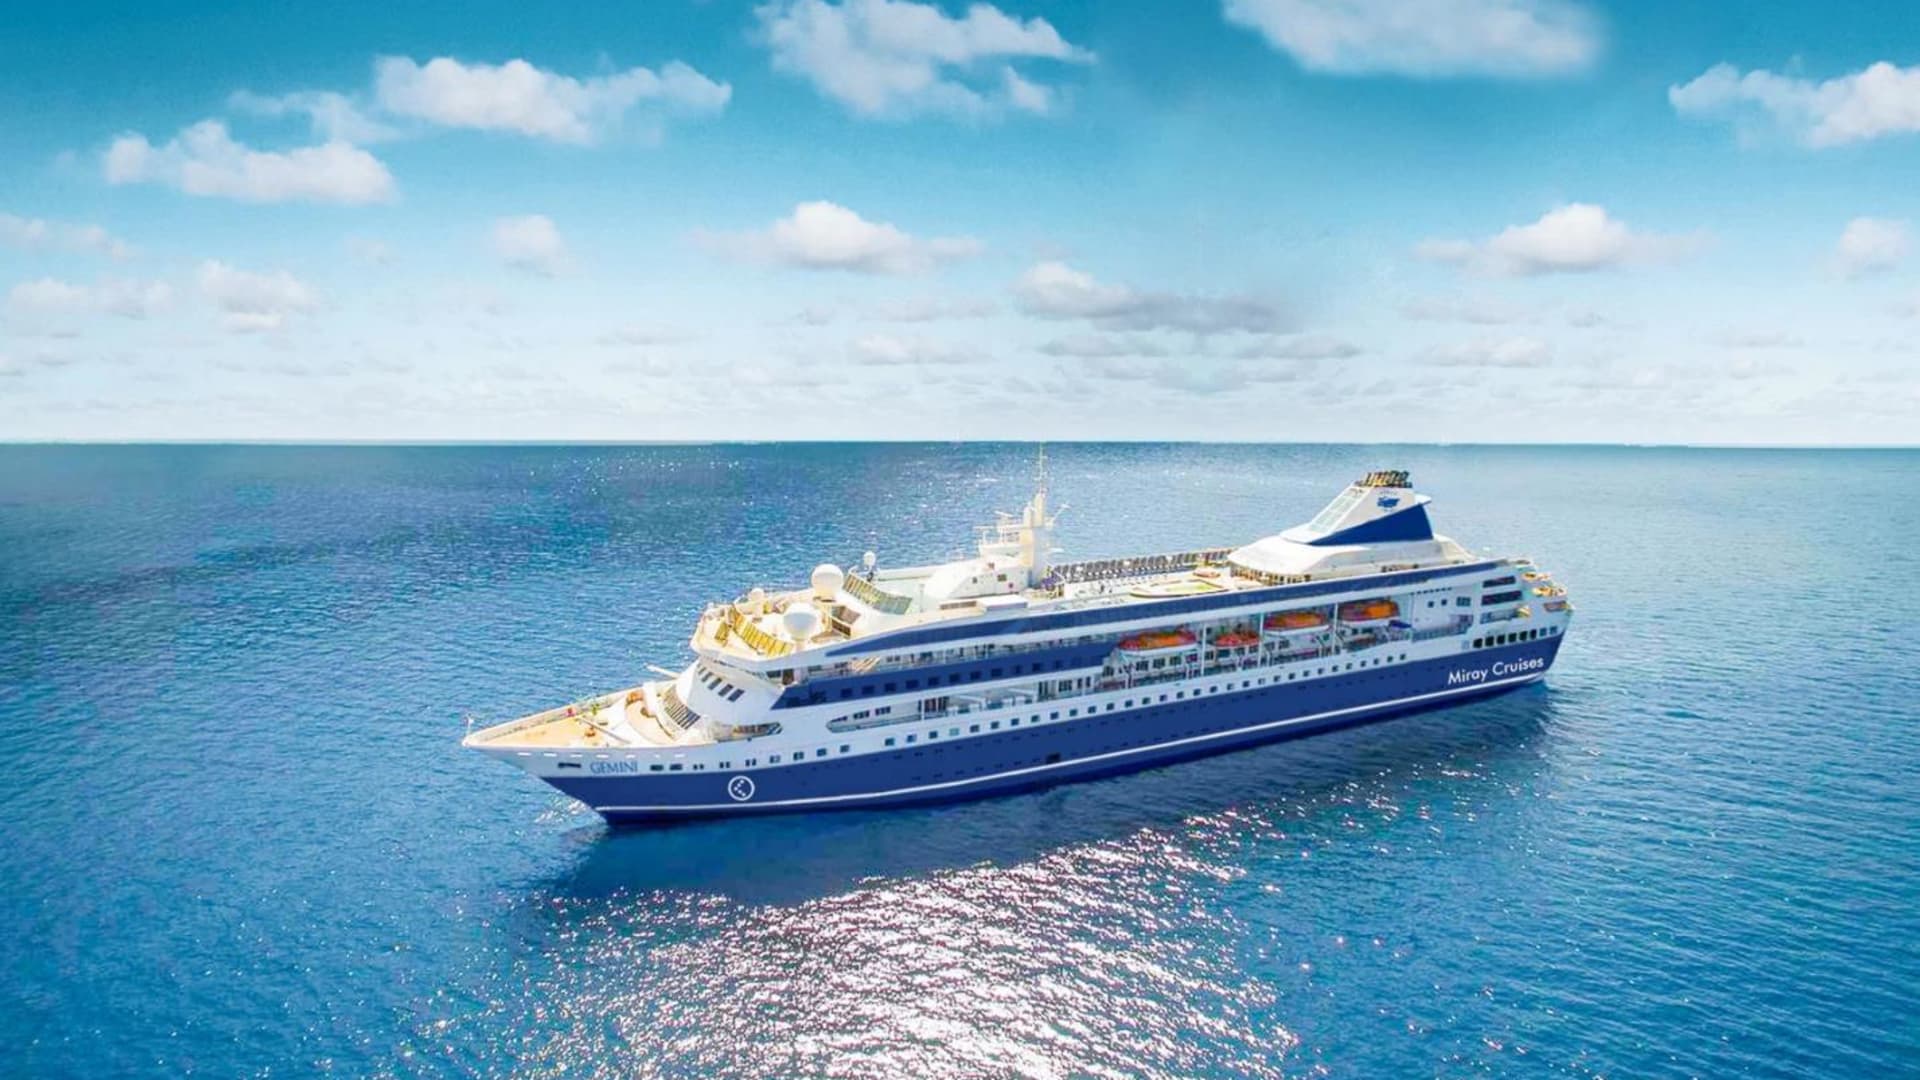 You can live on this cruise ship for $30,000/year—less than the average cost of rent in NYC